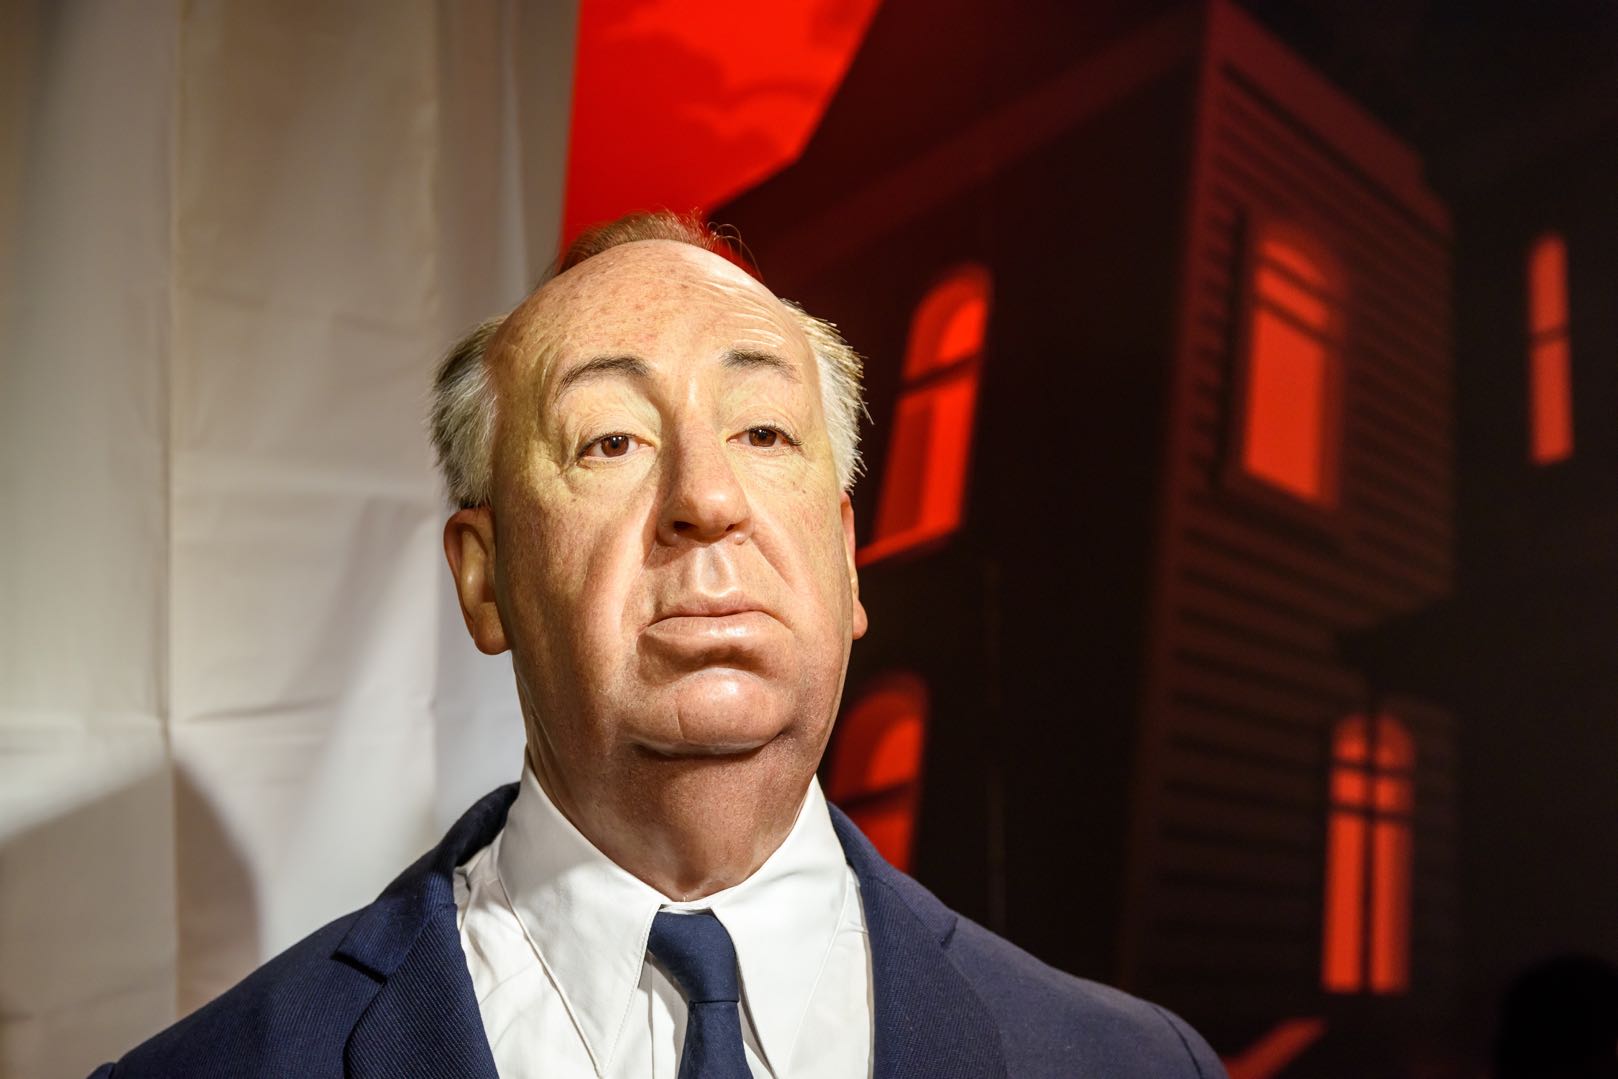 alfred hitchcock movies and tv shows